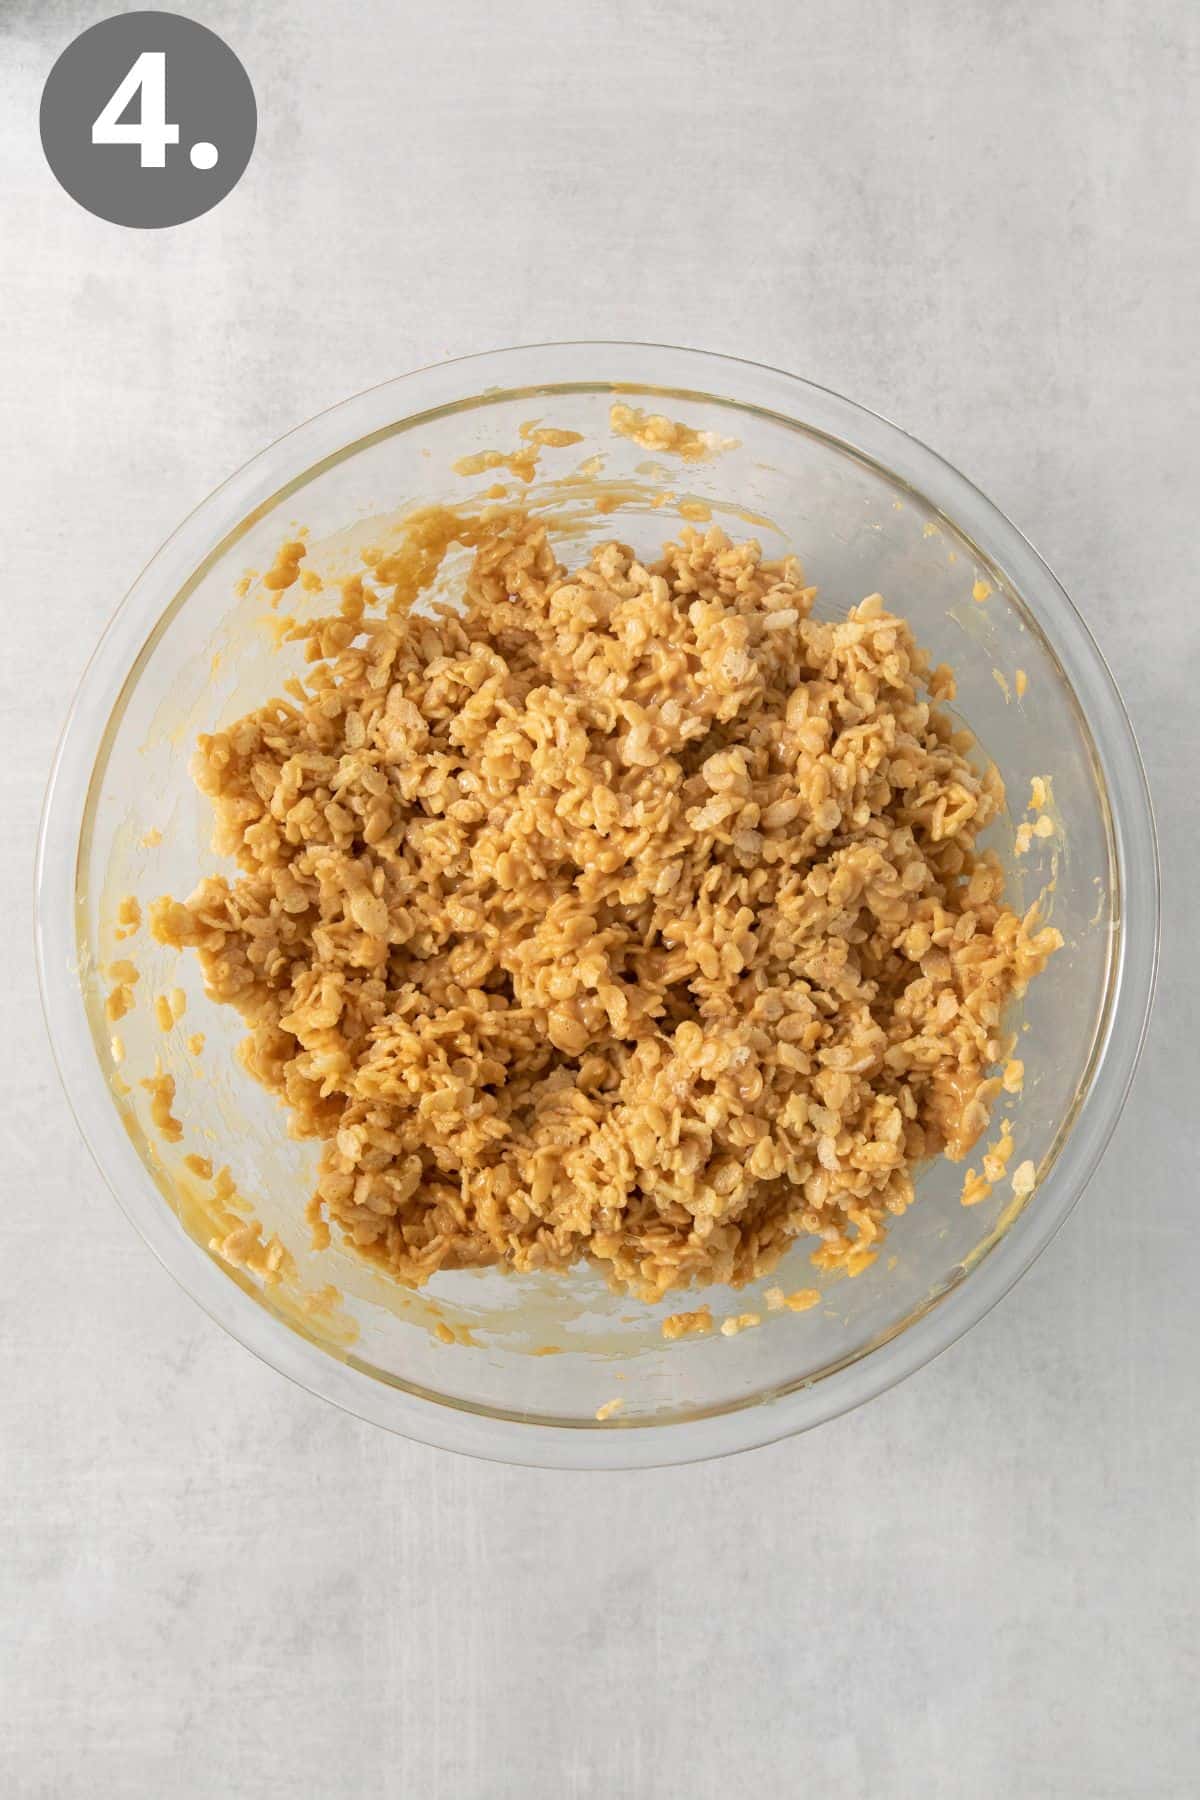 Corn syrup mixture and crispy rice mixed in a bowl